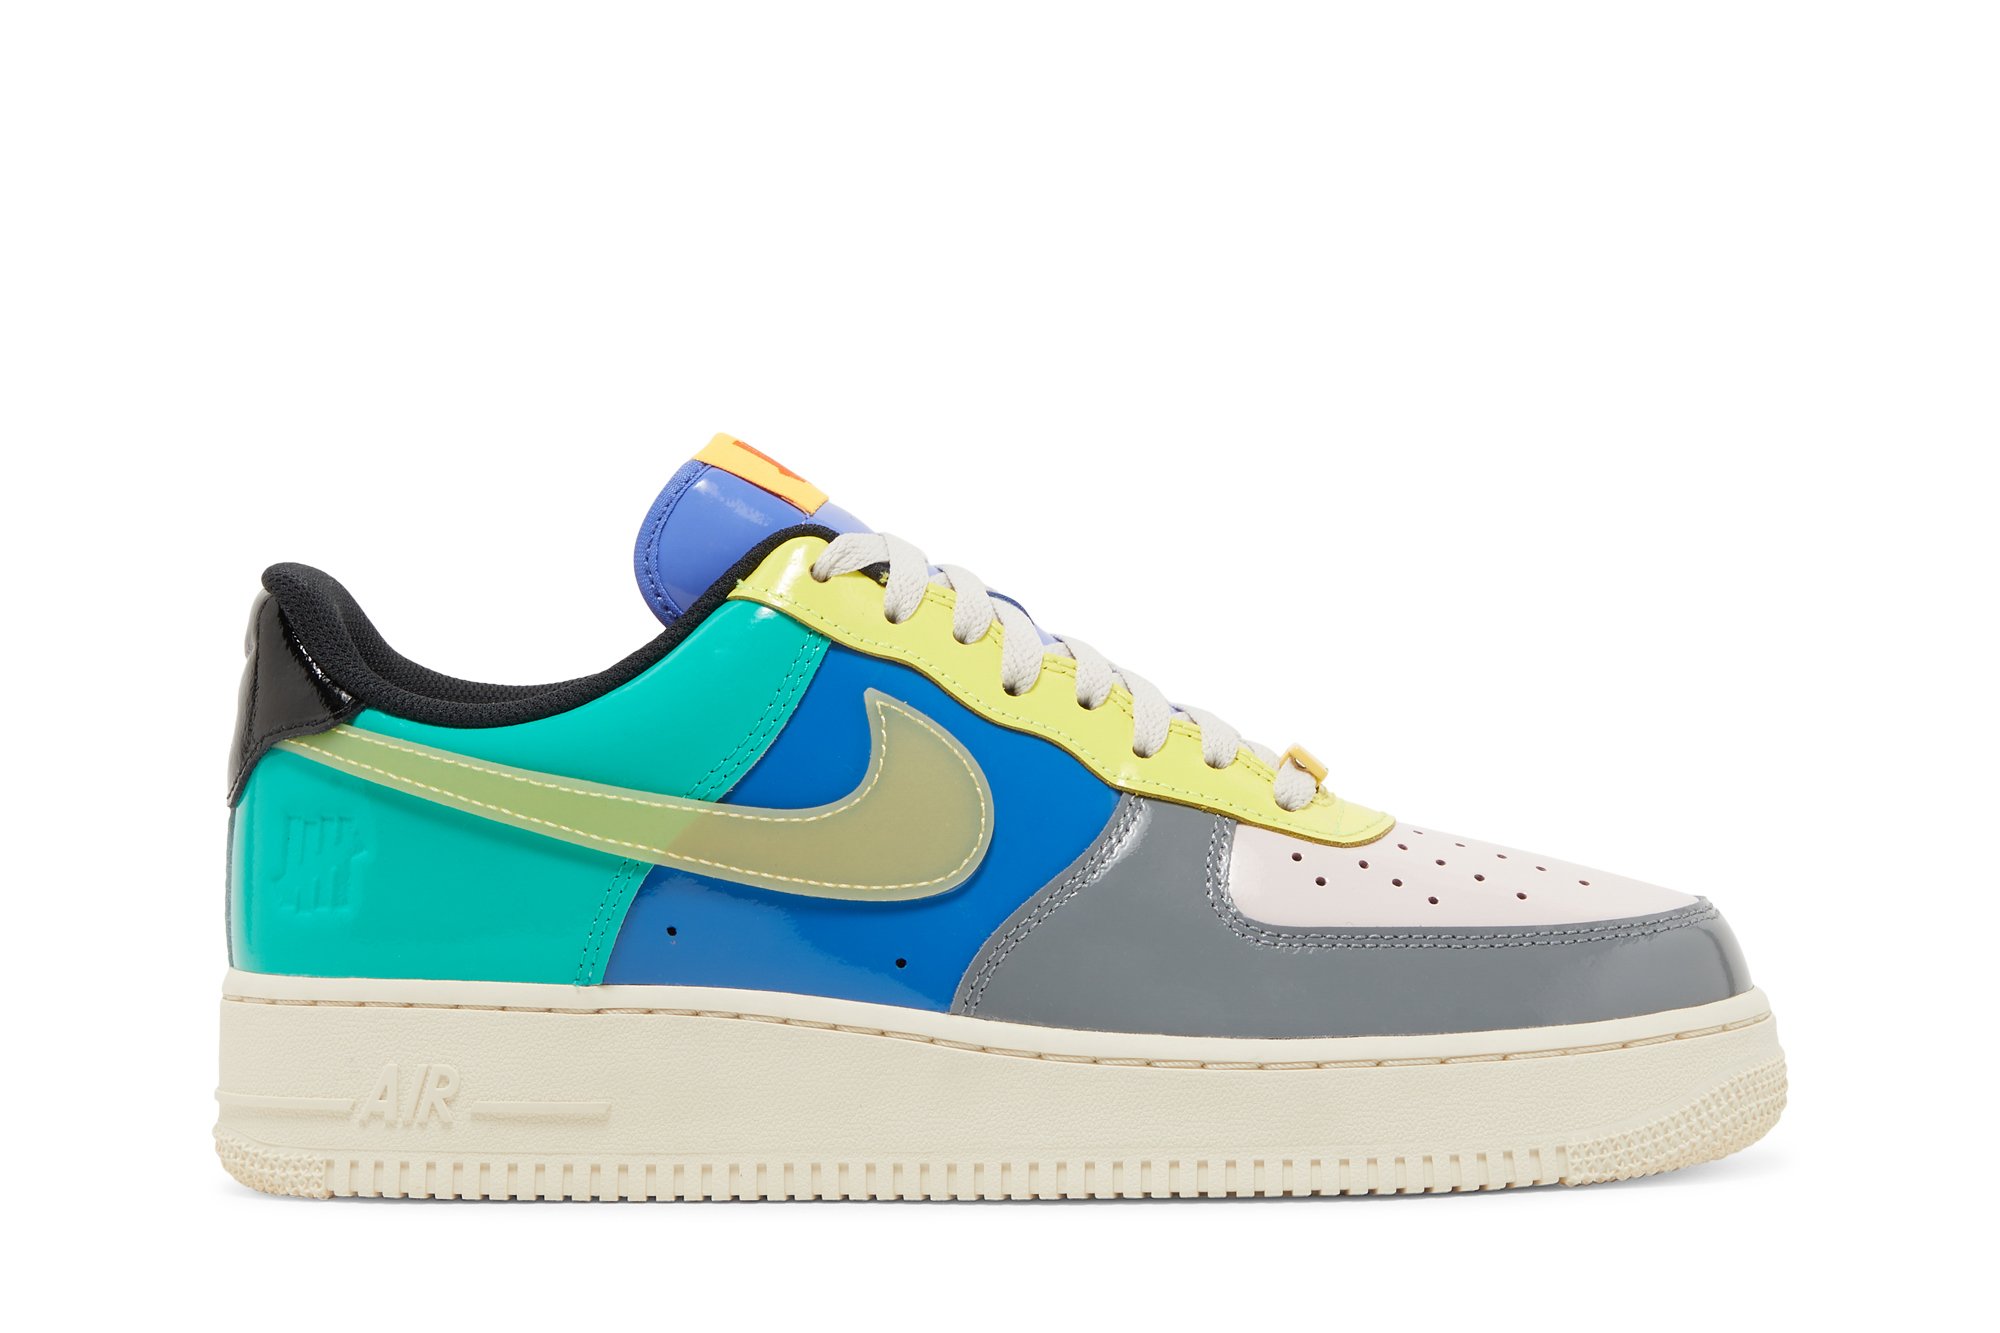 Buy Undefeated x Air Force 1 Low 'Community' - DV5255 001 | GOAT CA